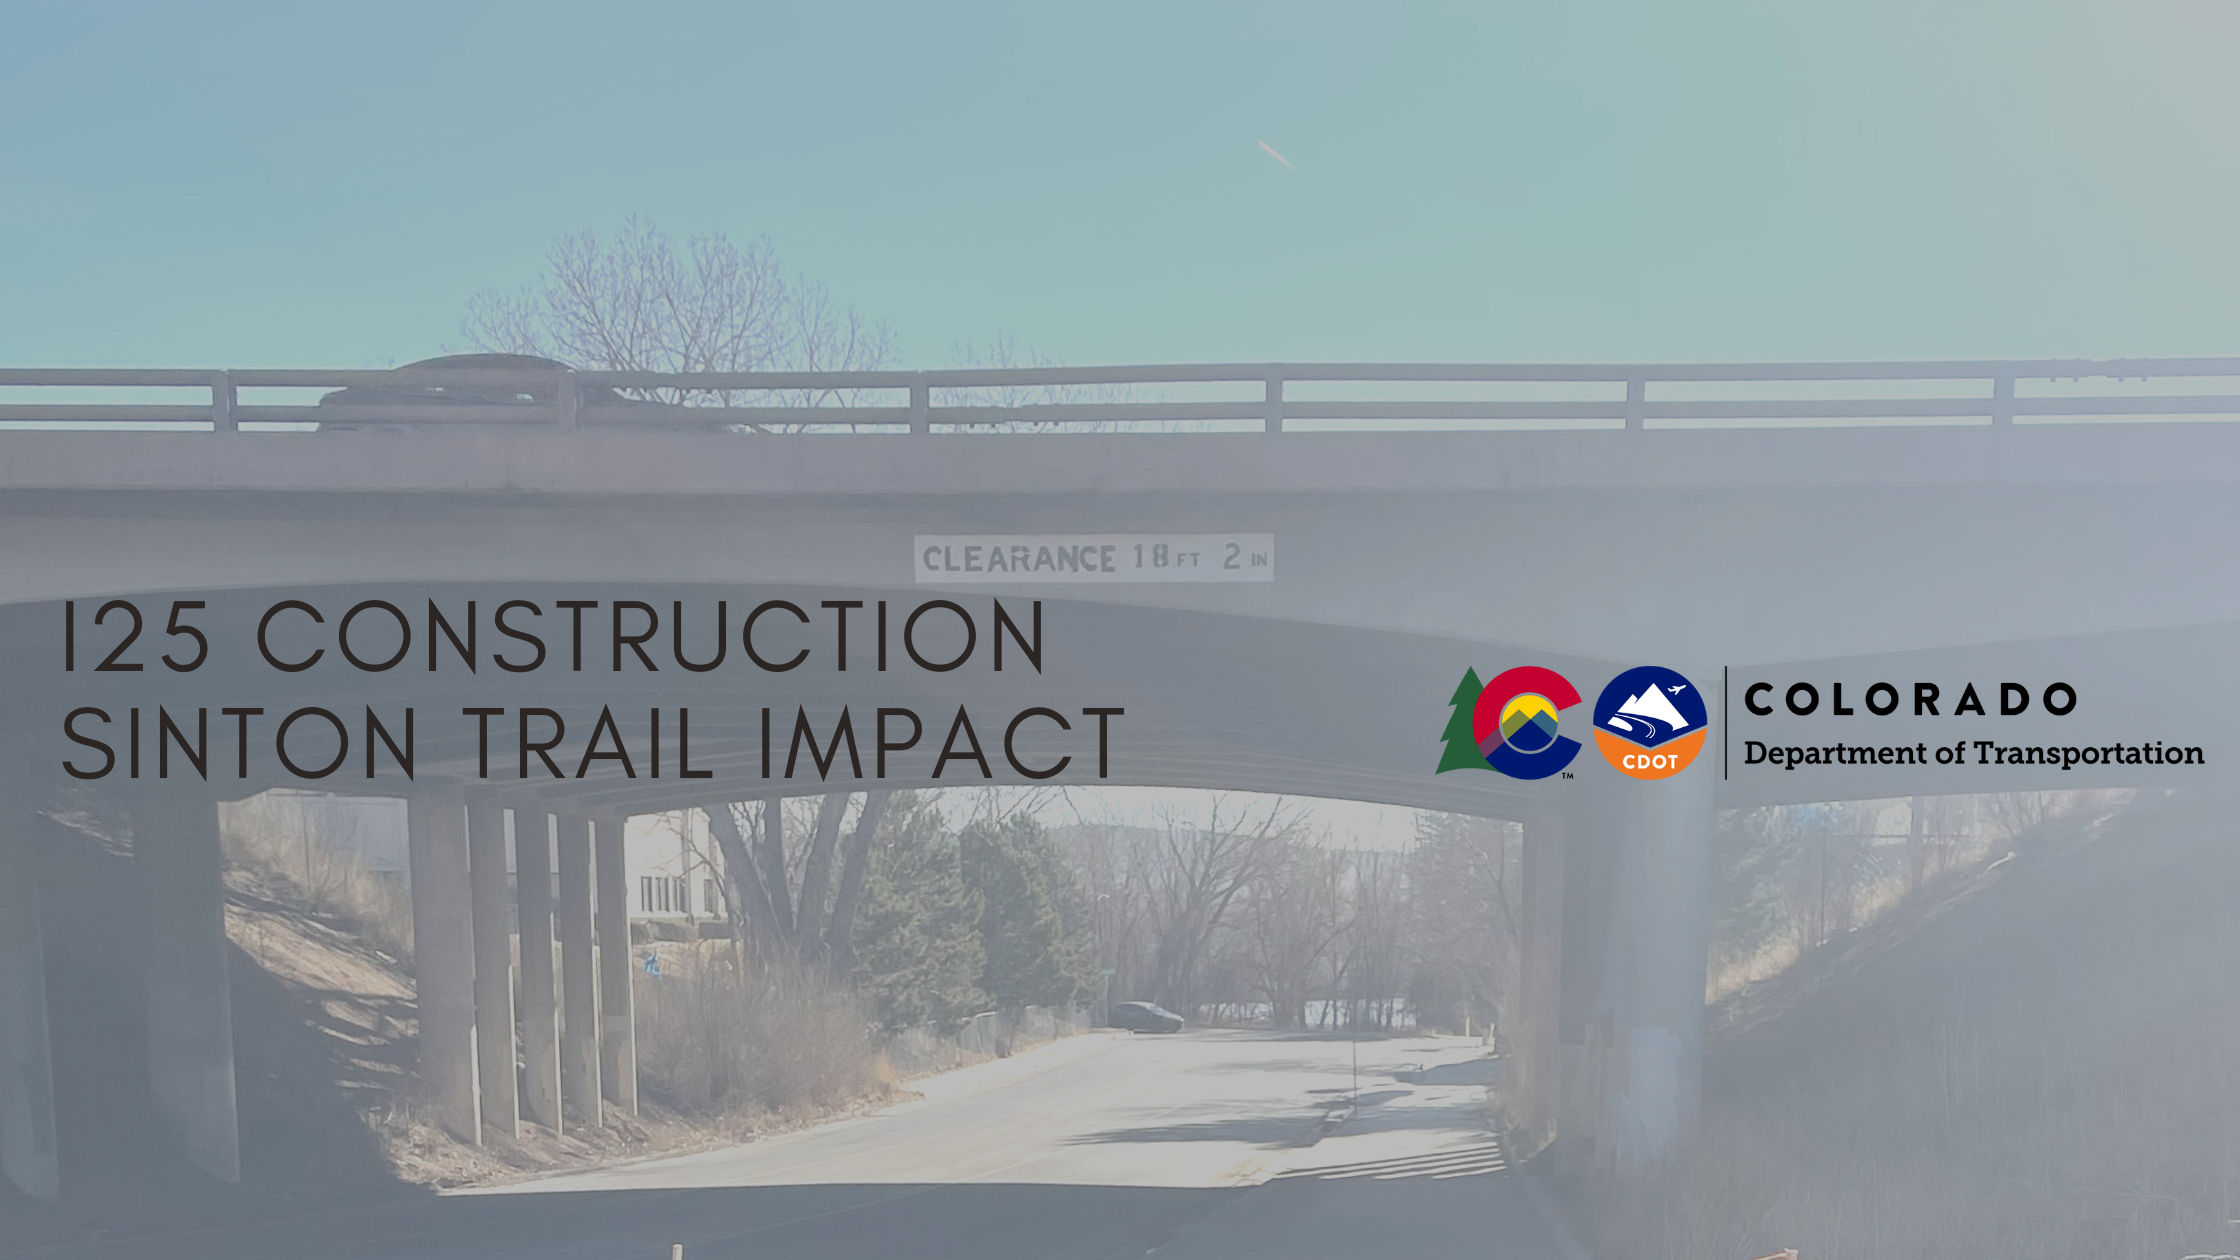 Sinton Trail To Be Impacted By I25 Construction